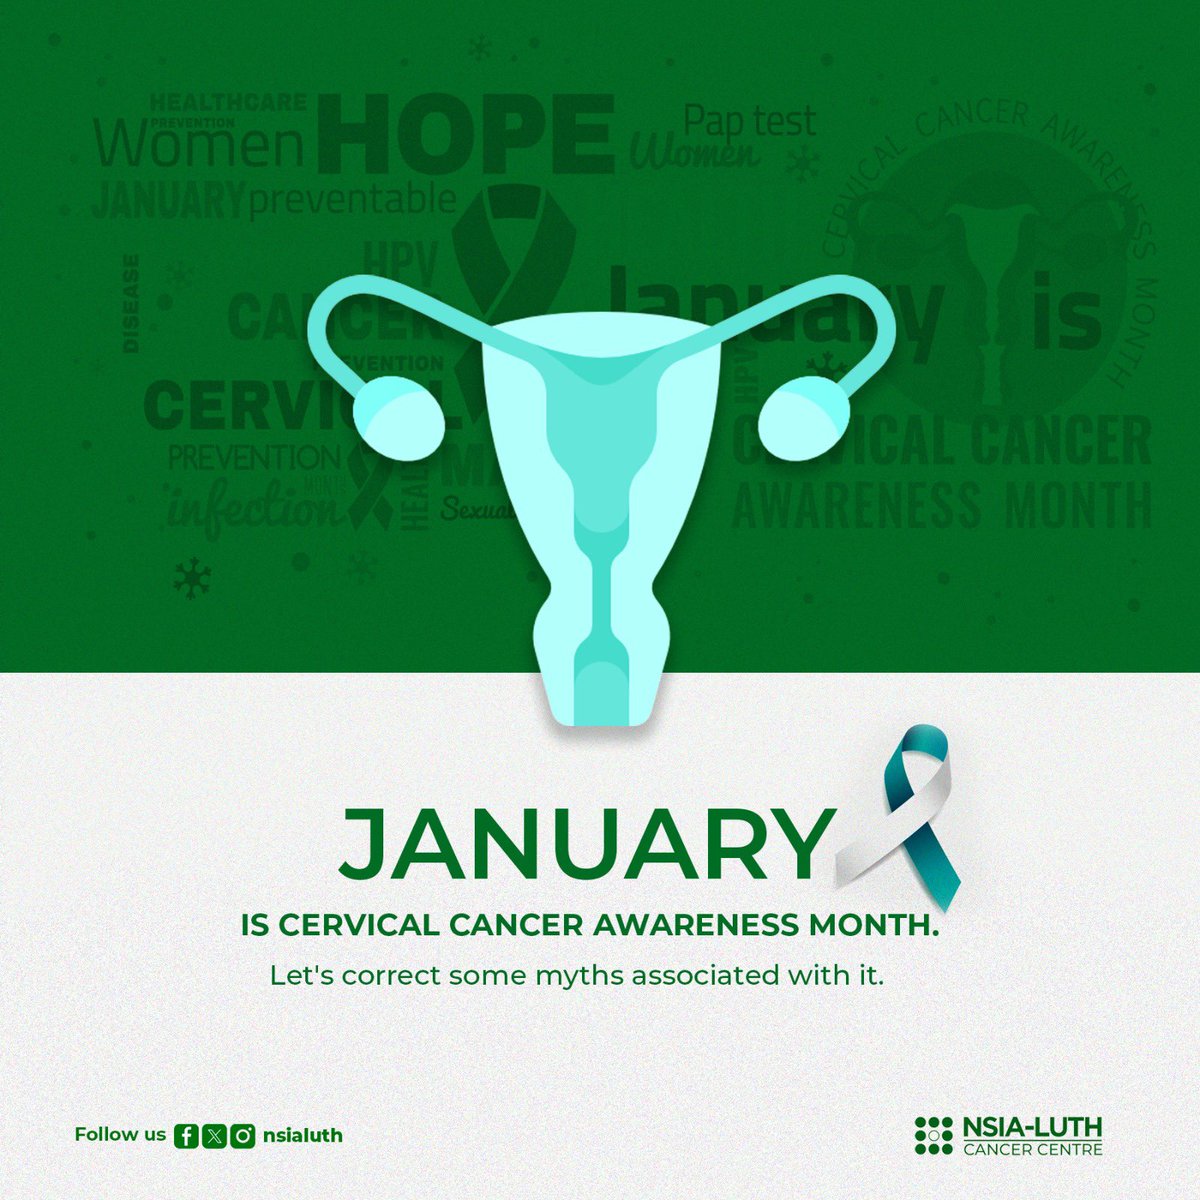 January marks Cervical Cancer Awareness Month—a dedicated time to amplify awareness, shatter stigma, and advocate for screening and early detection.
#CervicalCancerAwareness #MythsAndFacts #CervicalHealth #NLCC